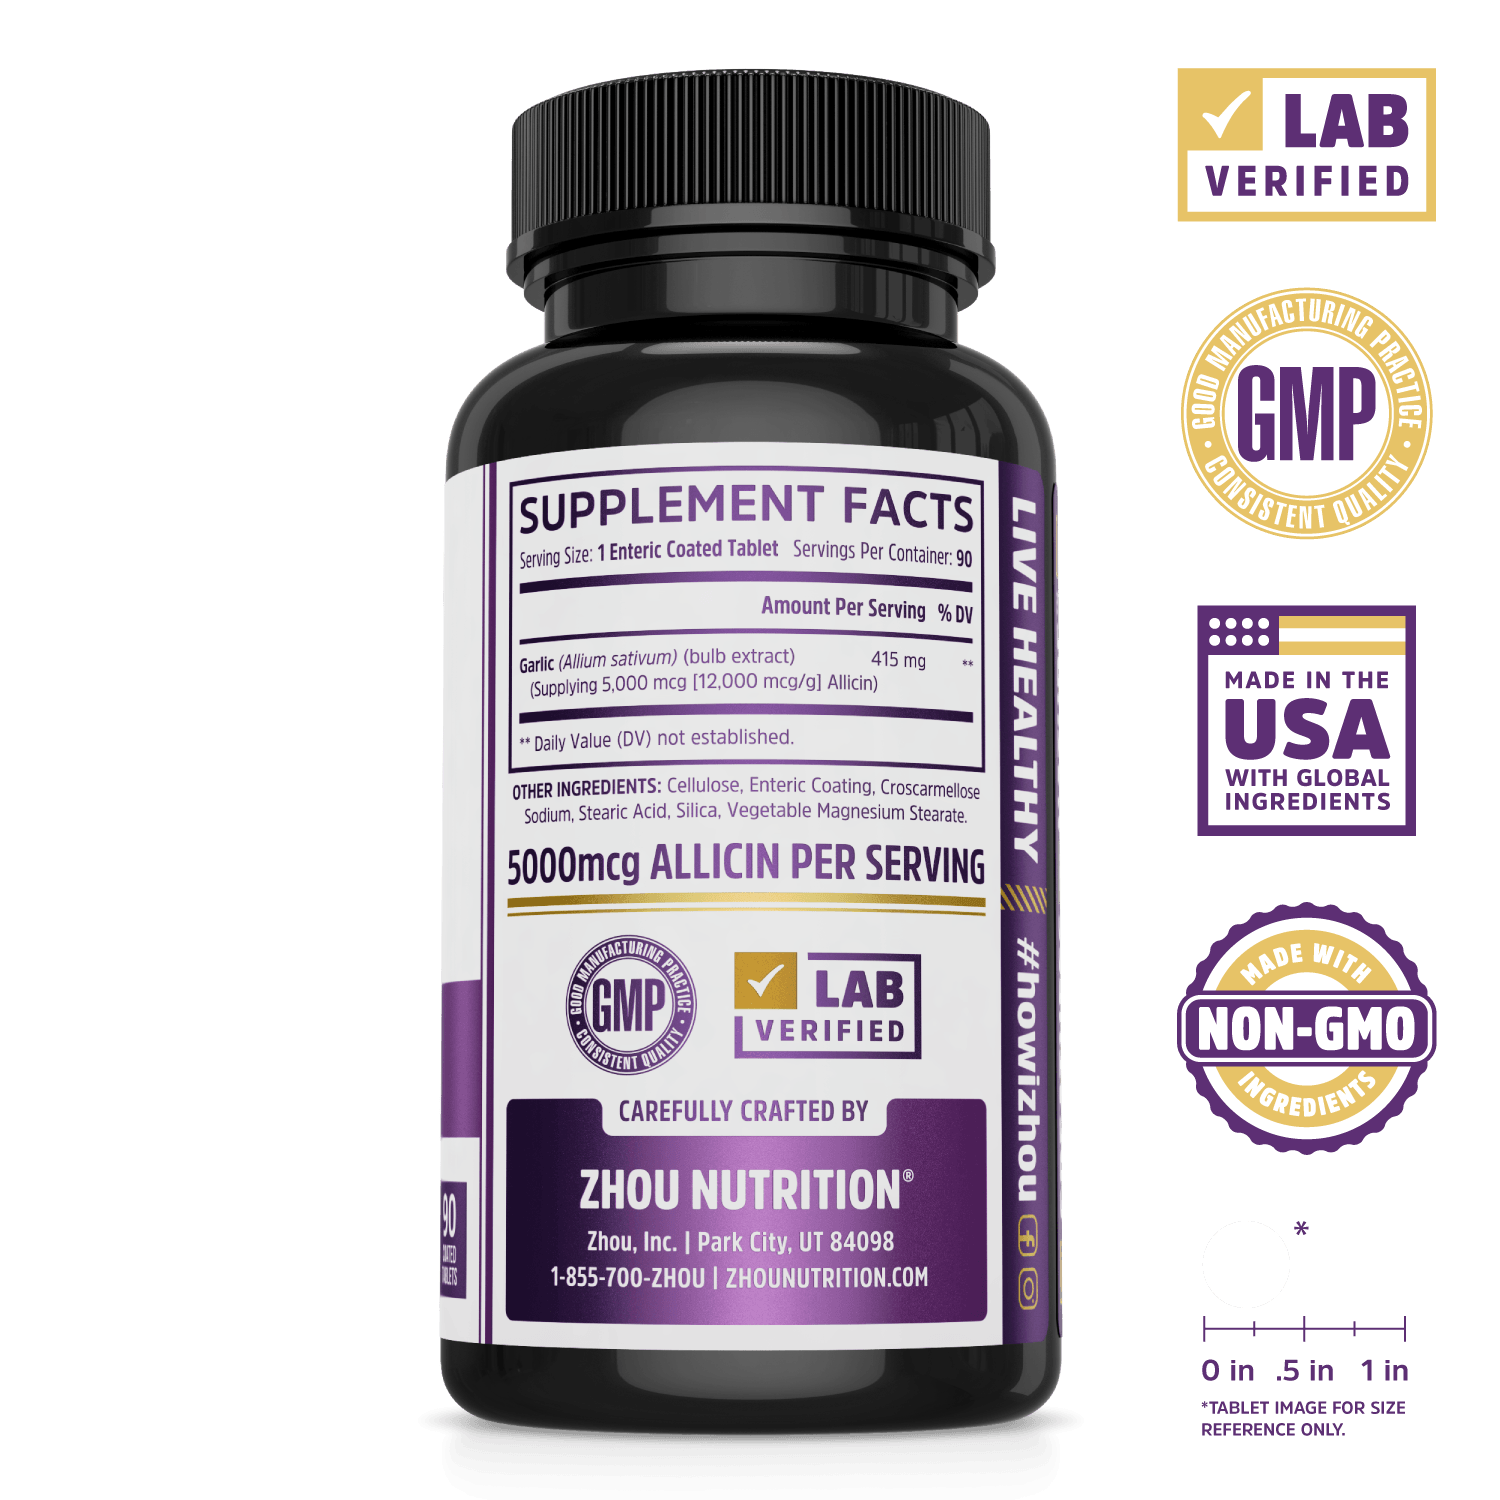 Zhou Nutrition Garlic Supplement with Allicin. Lab verified, good manufacturing practices, made in the USA with global ingredients, made with non-GMO ingredients